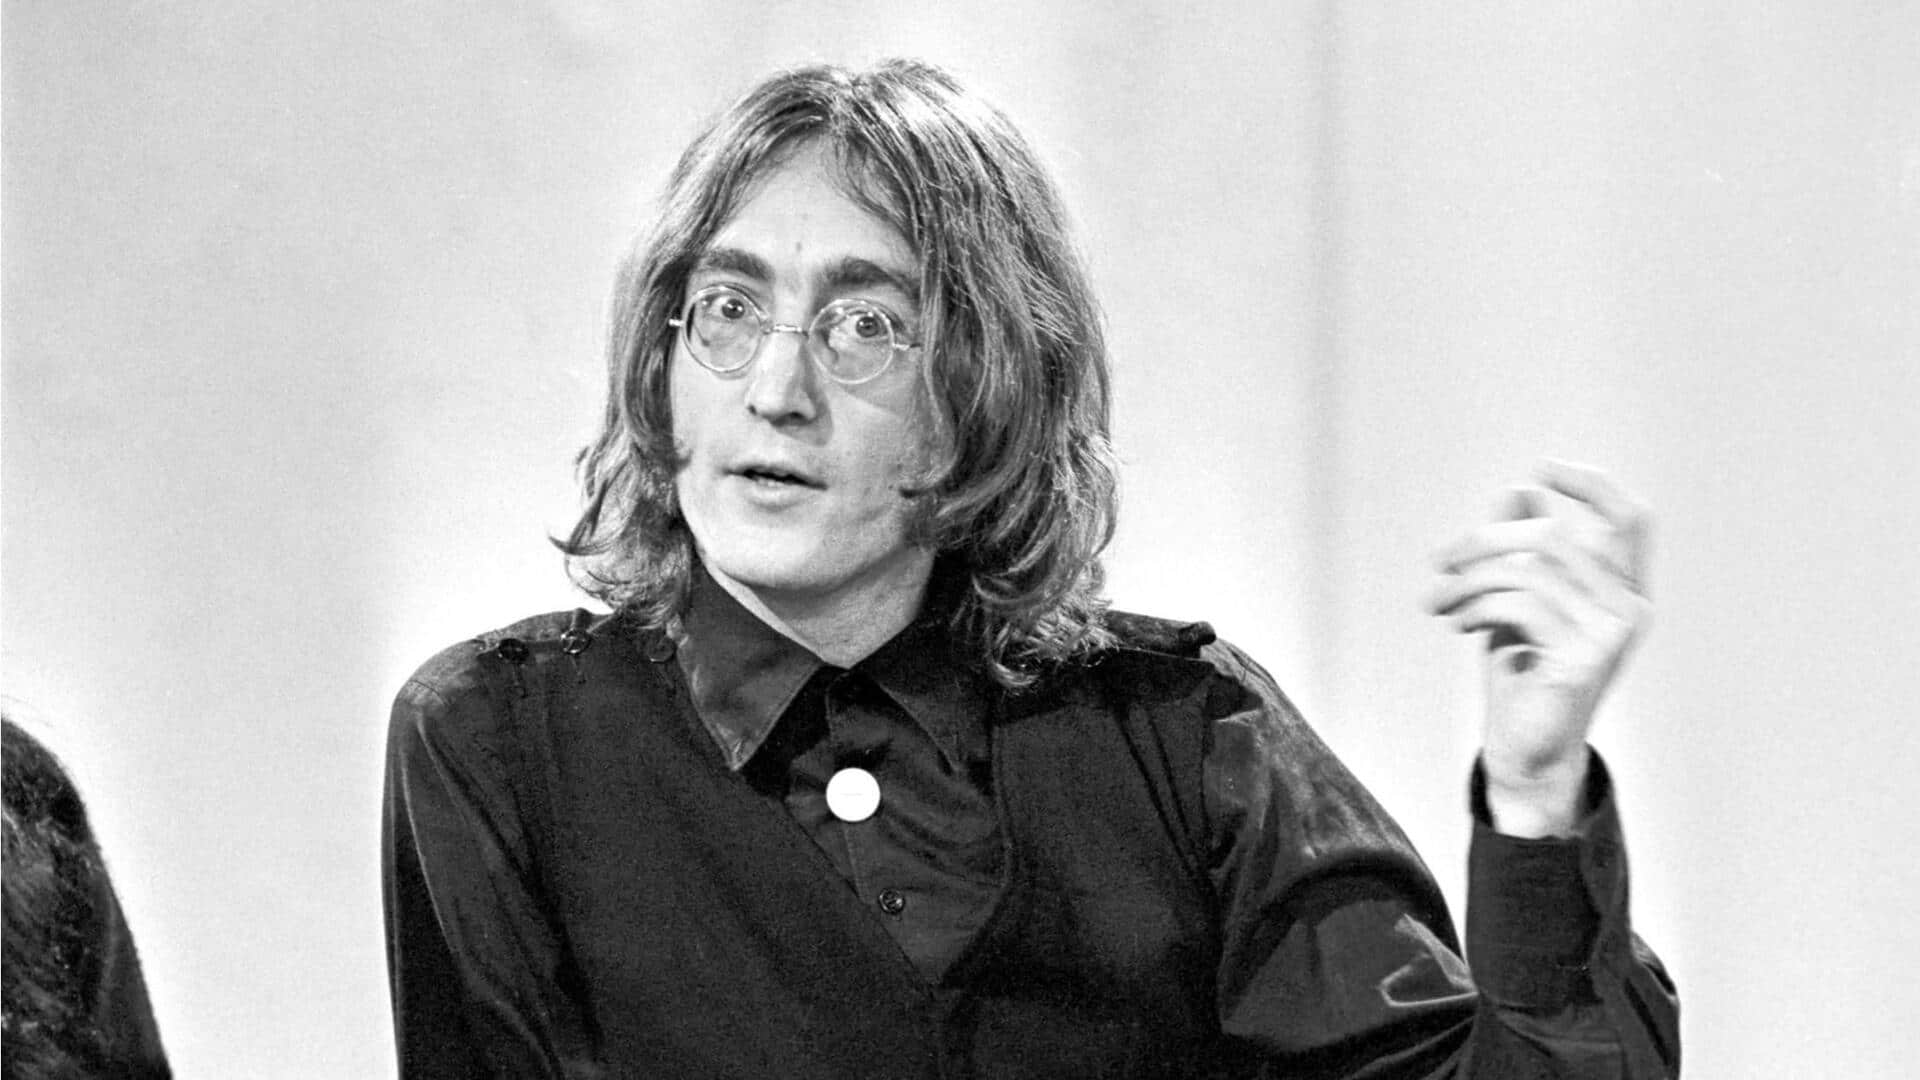 John Lennon's long-lost guitar fetches record $2.9M at auction!